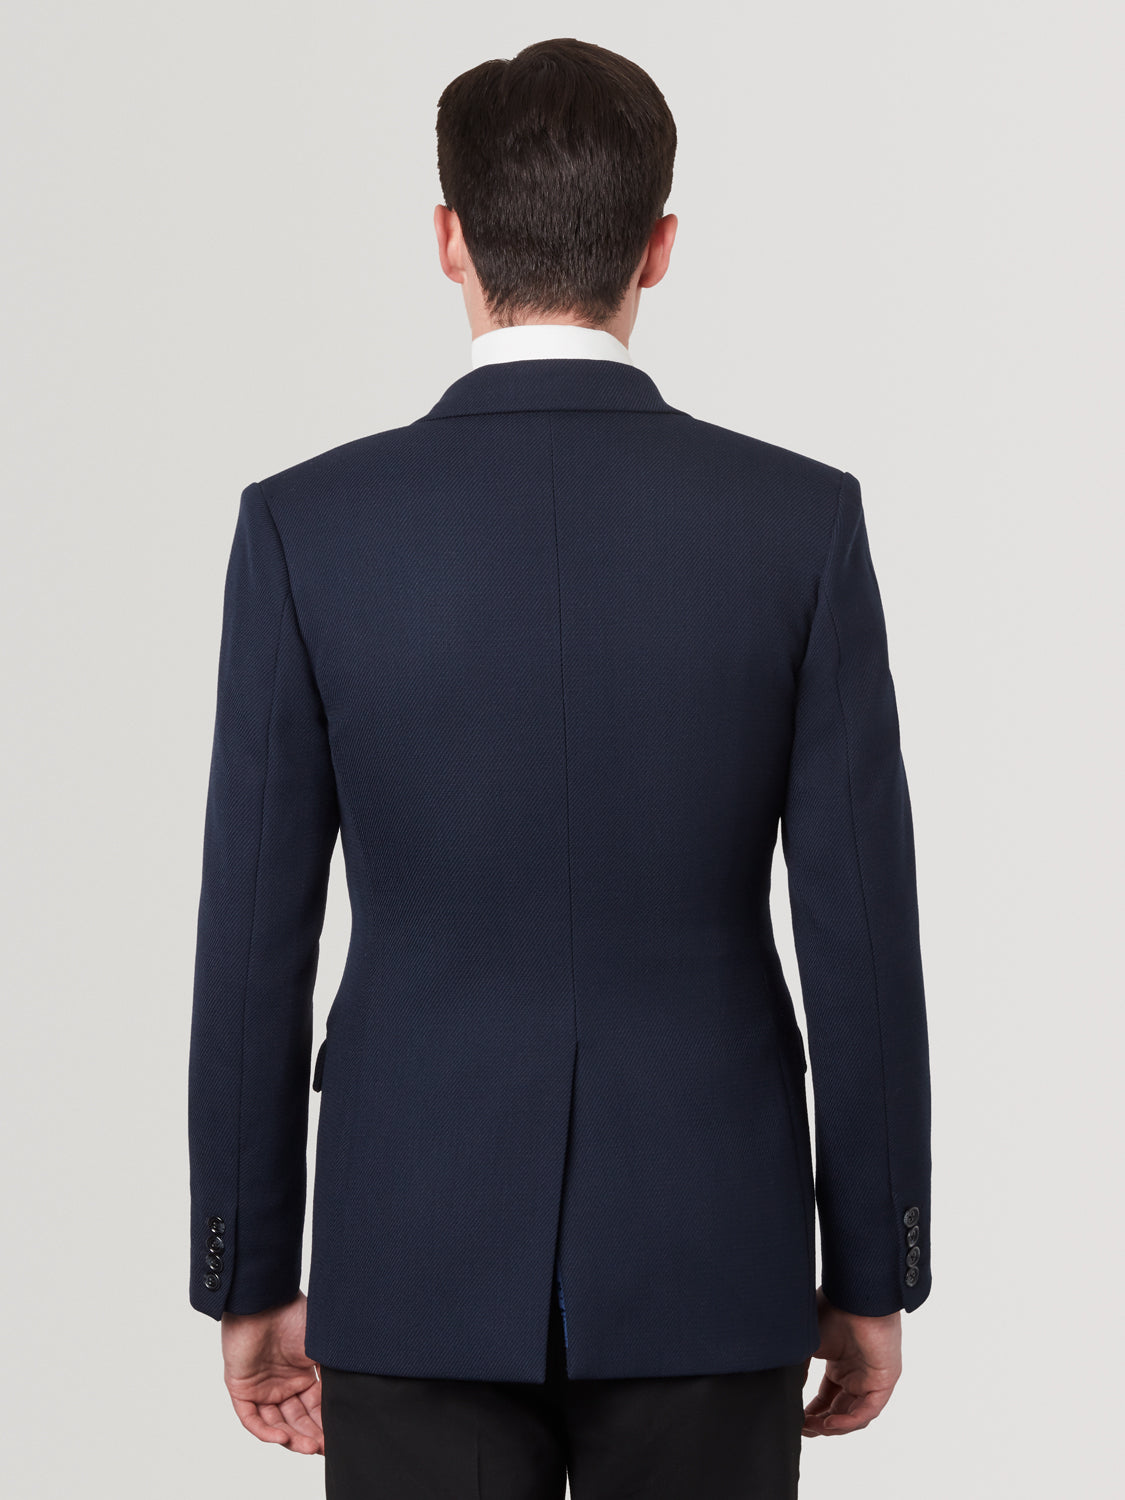 Double Breasted Suit Jacket - Navy